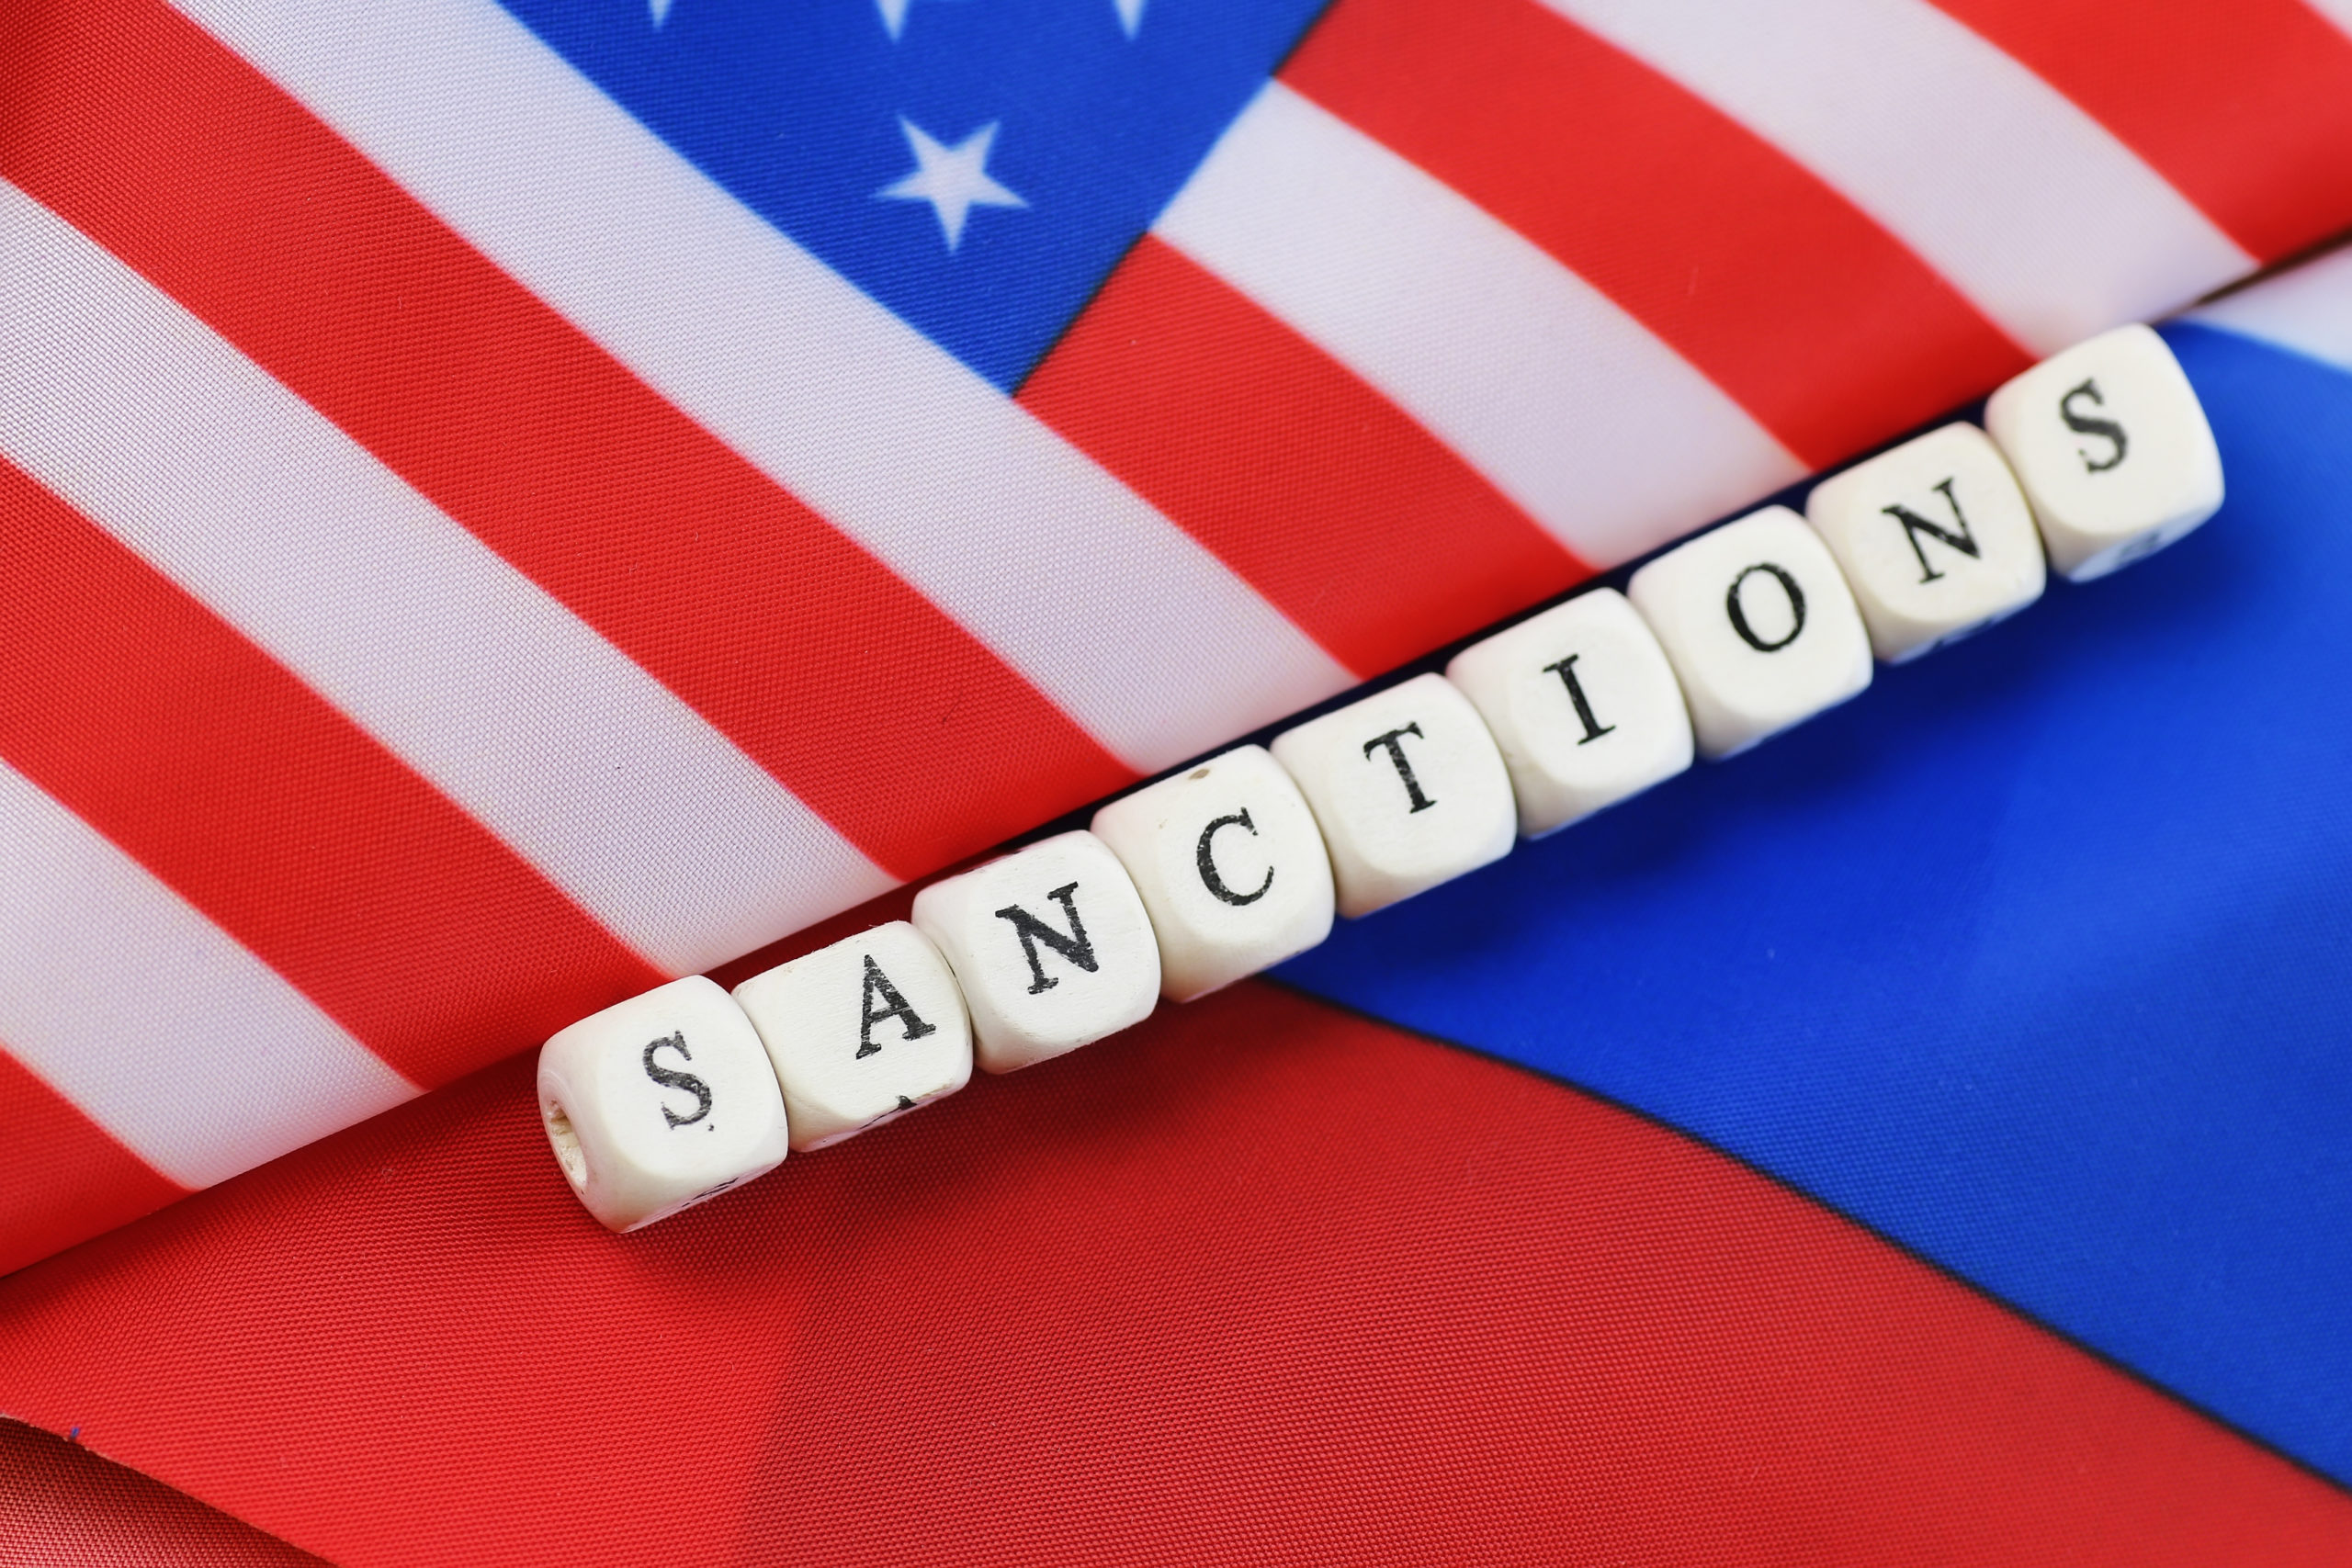 Russia Left Without Support As the US Strengthened Sanctions Grip